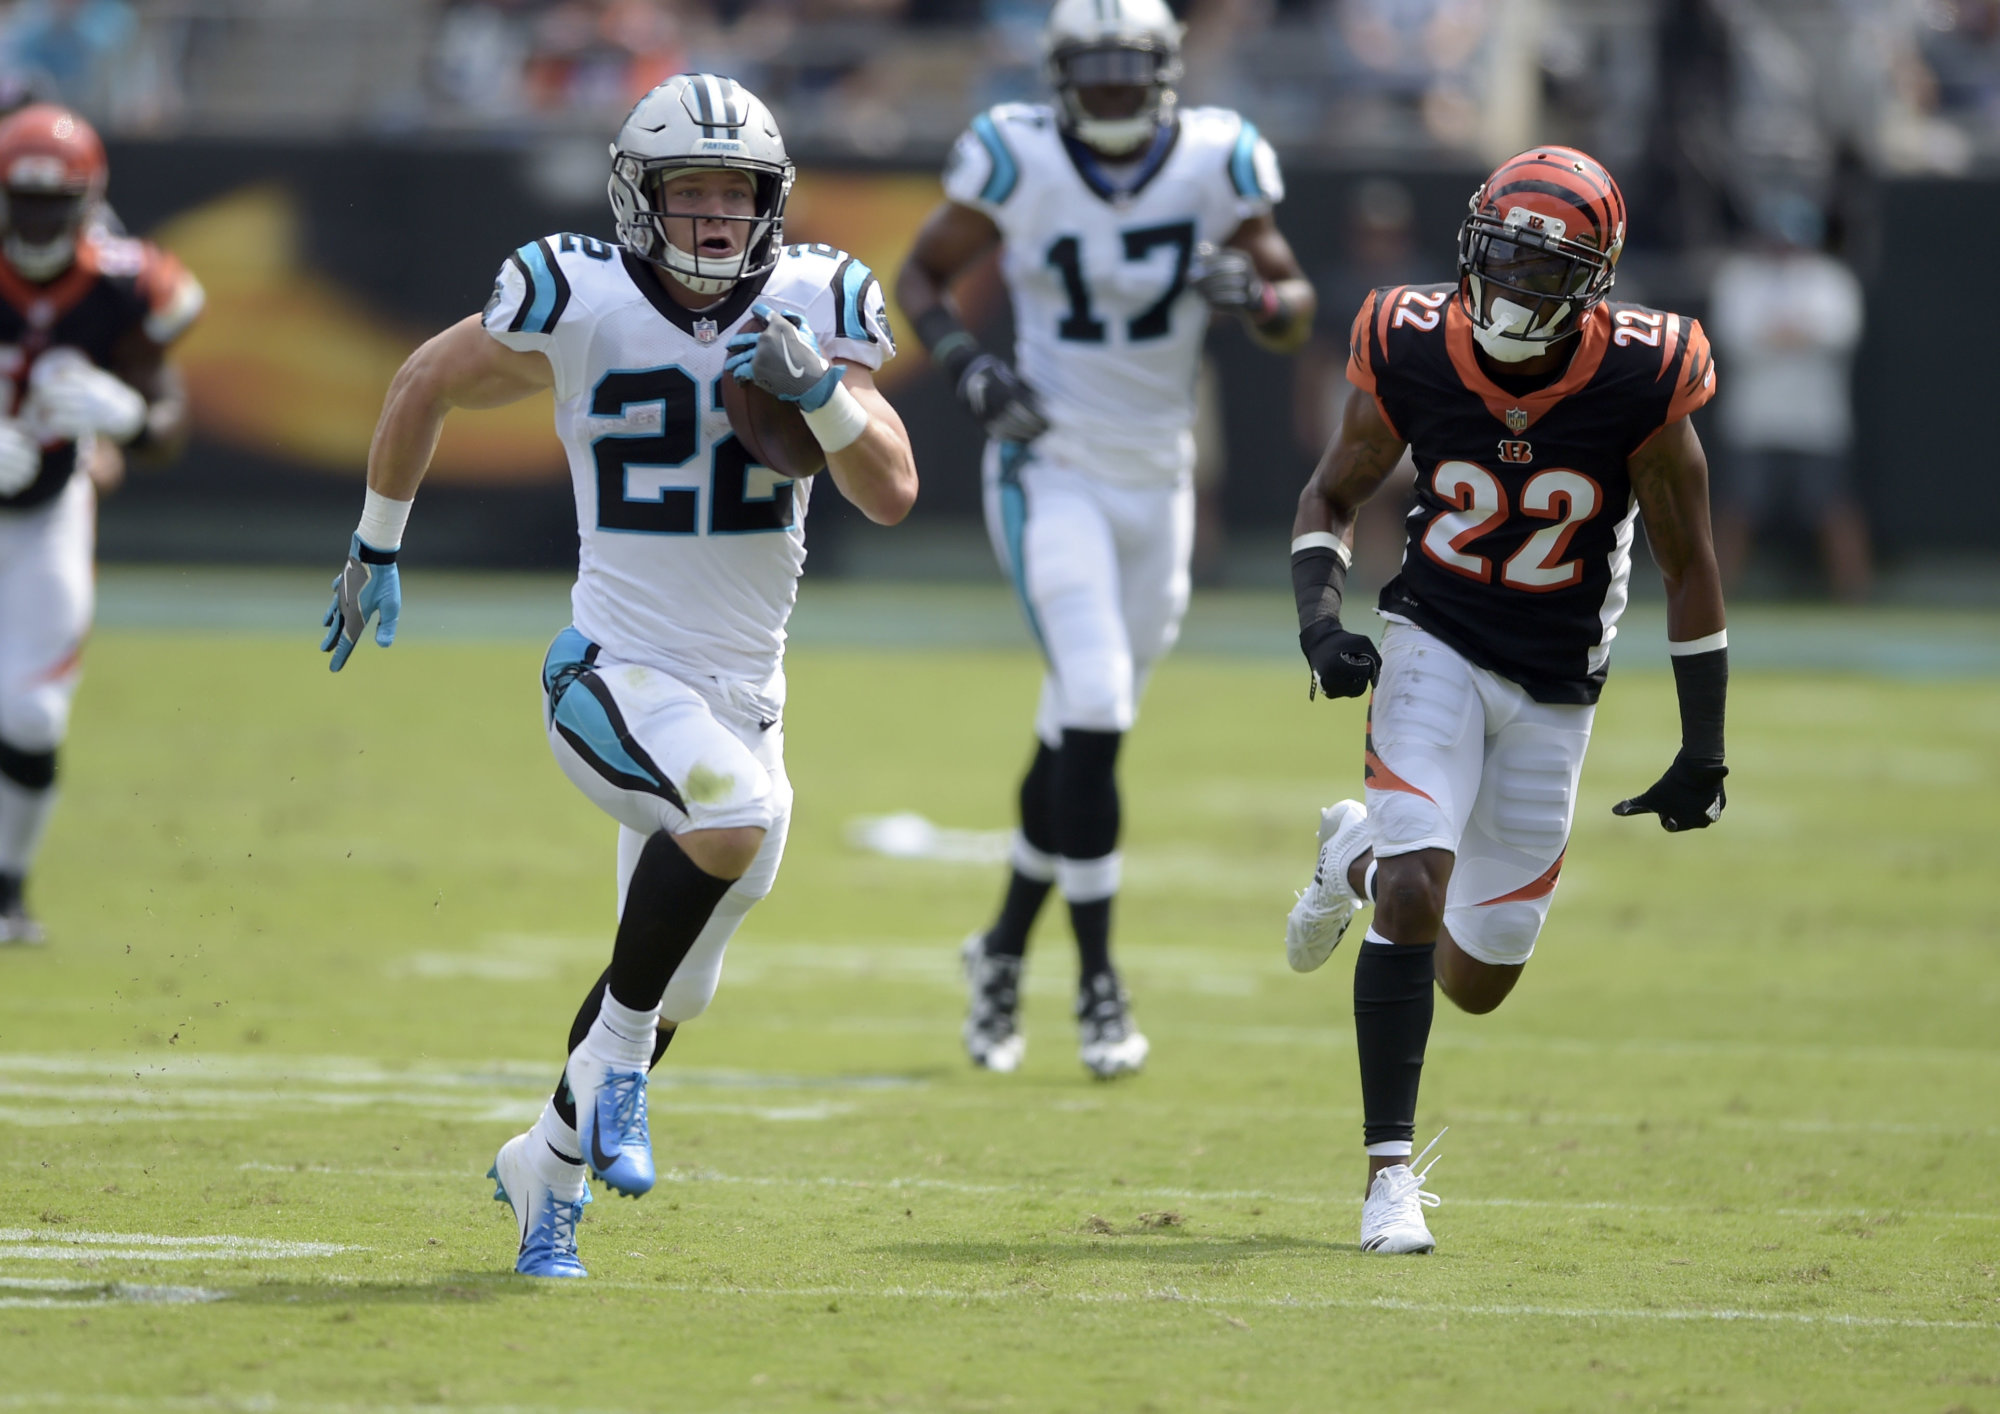 Carolina Panthers' Christian McCaffrey, left, runs past Cincinnati Bengals' William Jackson, right, during the first half of an NFL football game in Charlotte, N.C., Sunday, Sept. 23, 2018. (AP Photo/Mike McCarn)